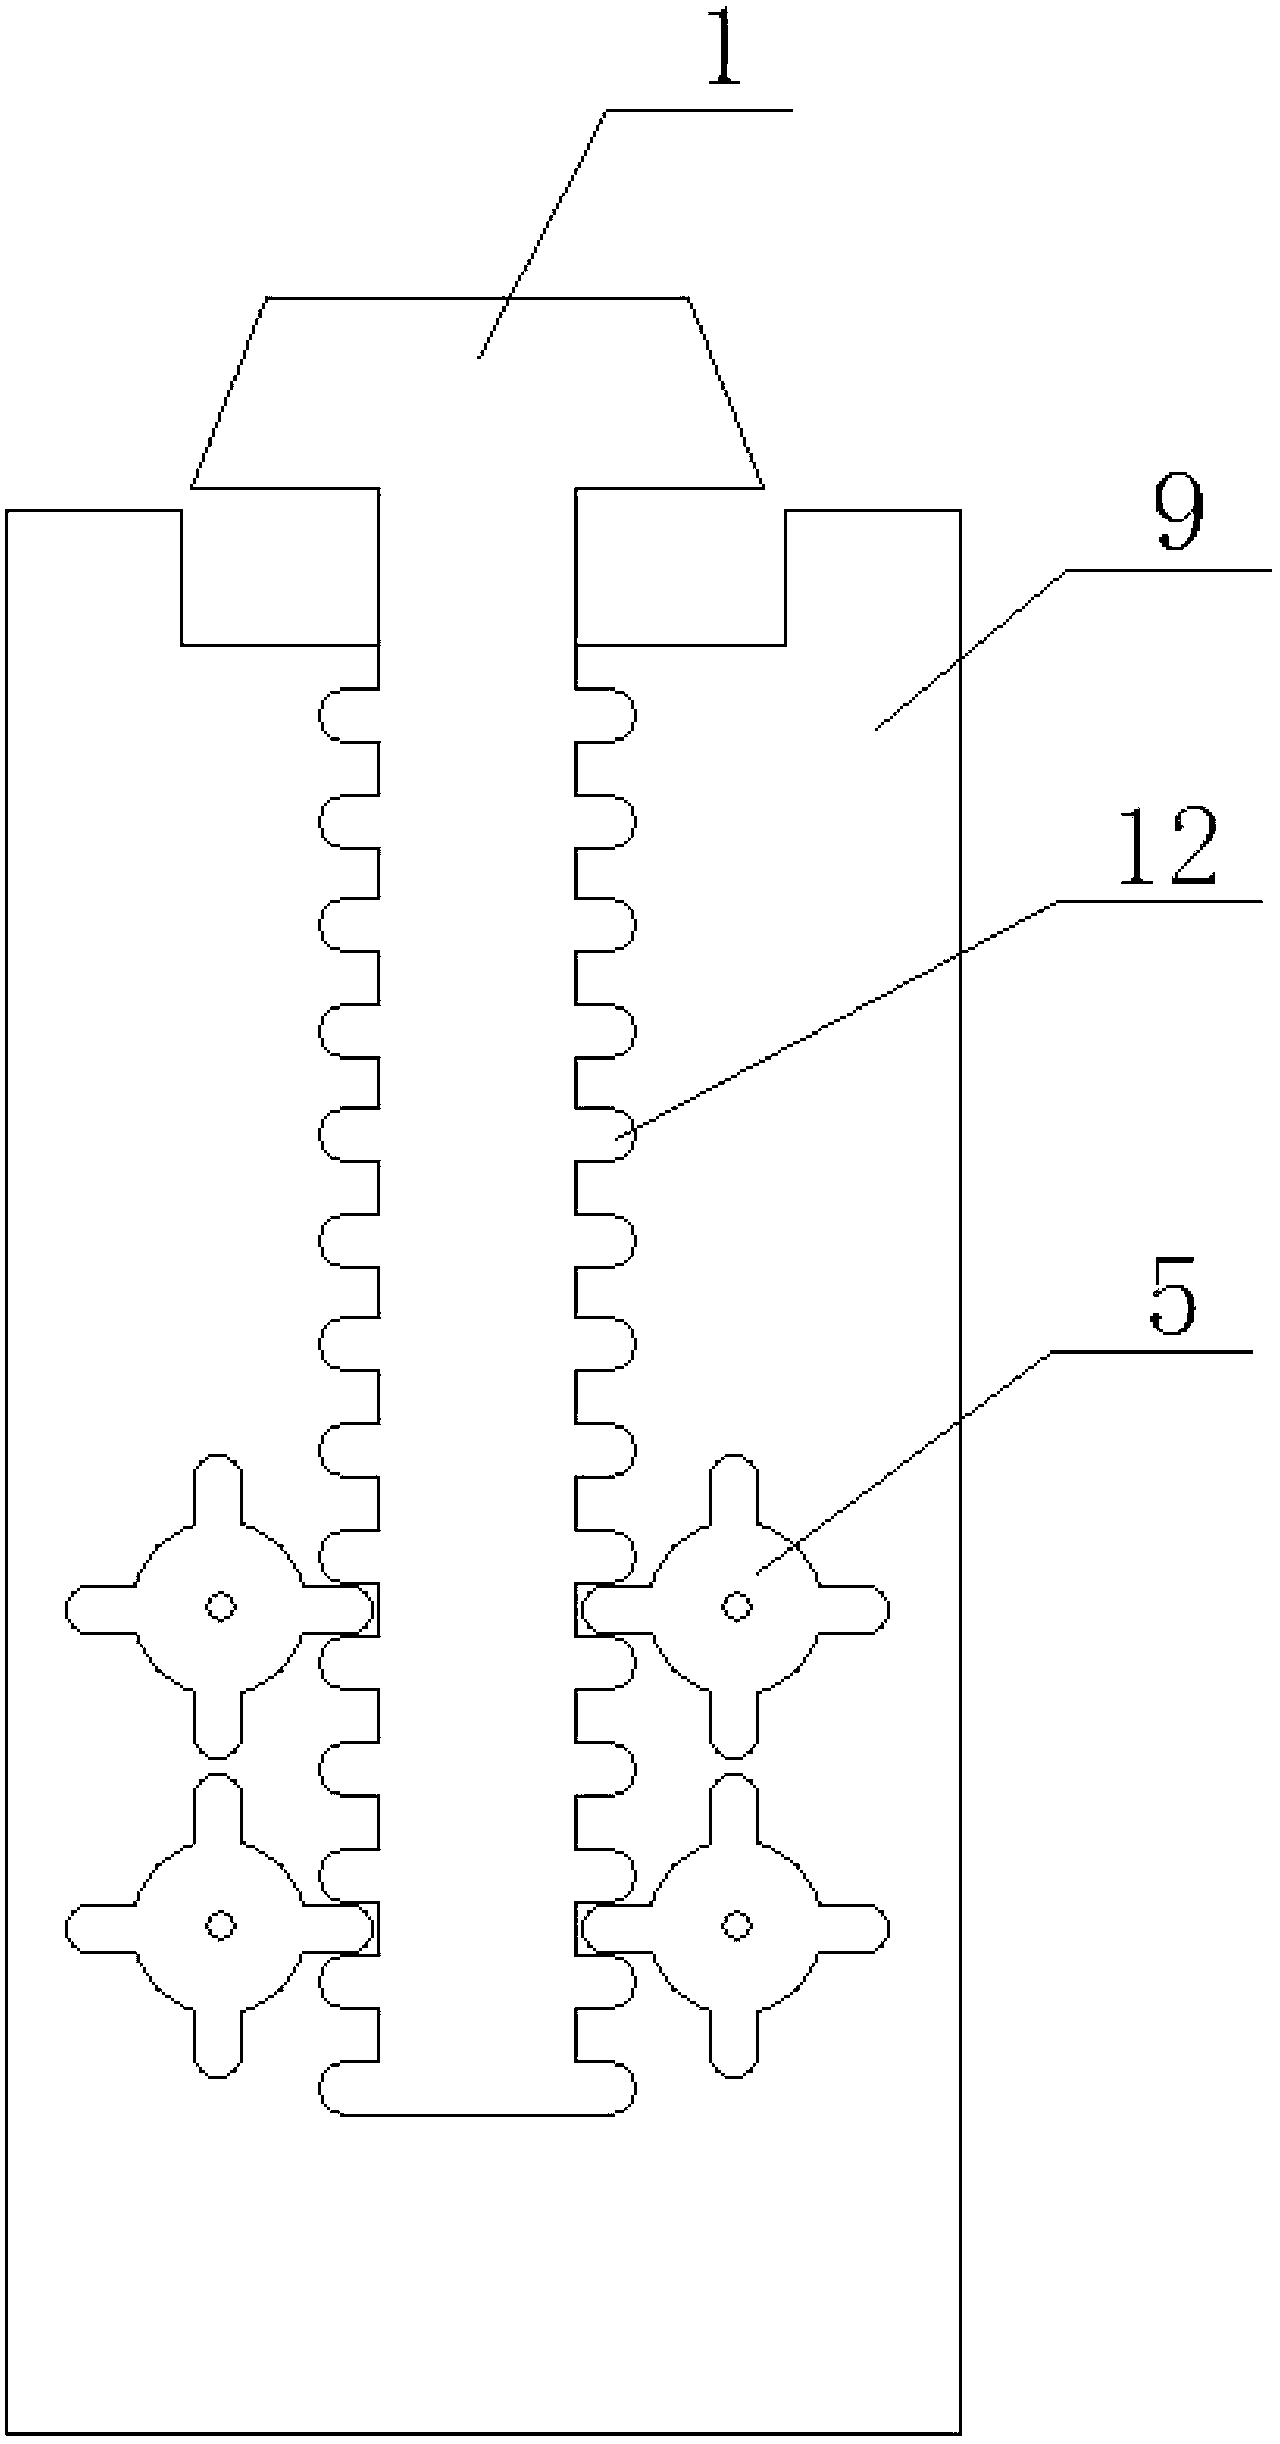 Air compression energy storing device for road